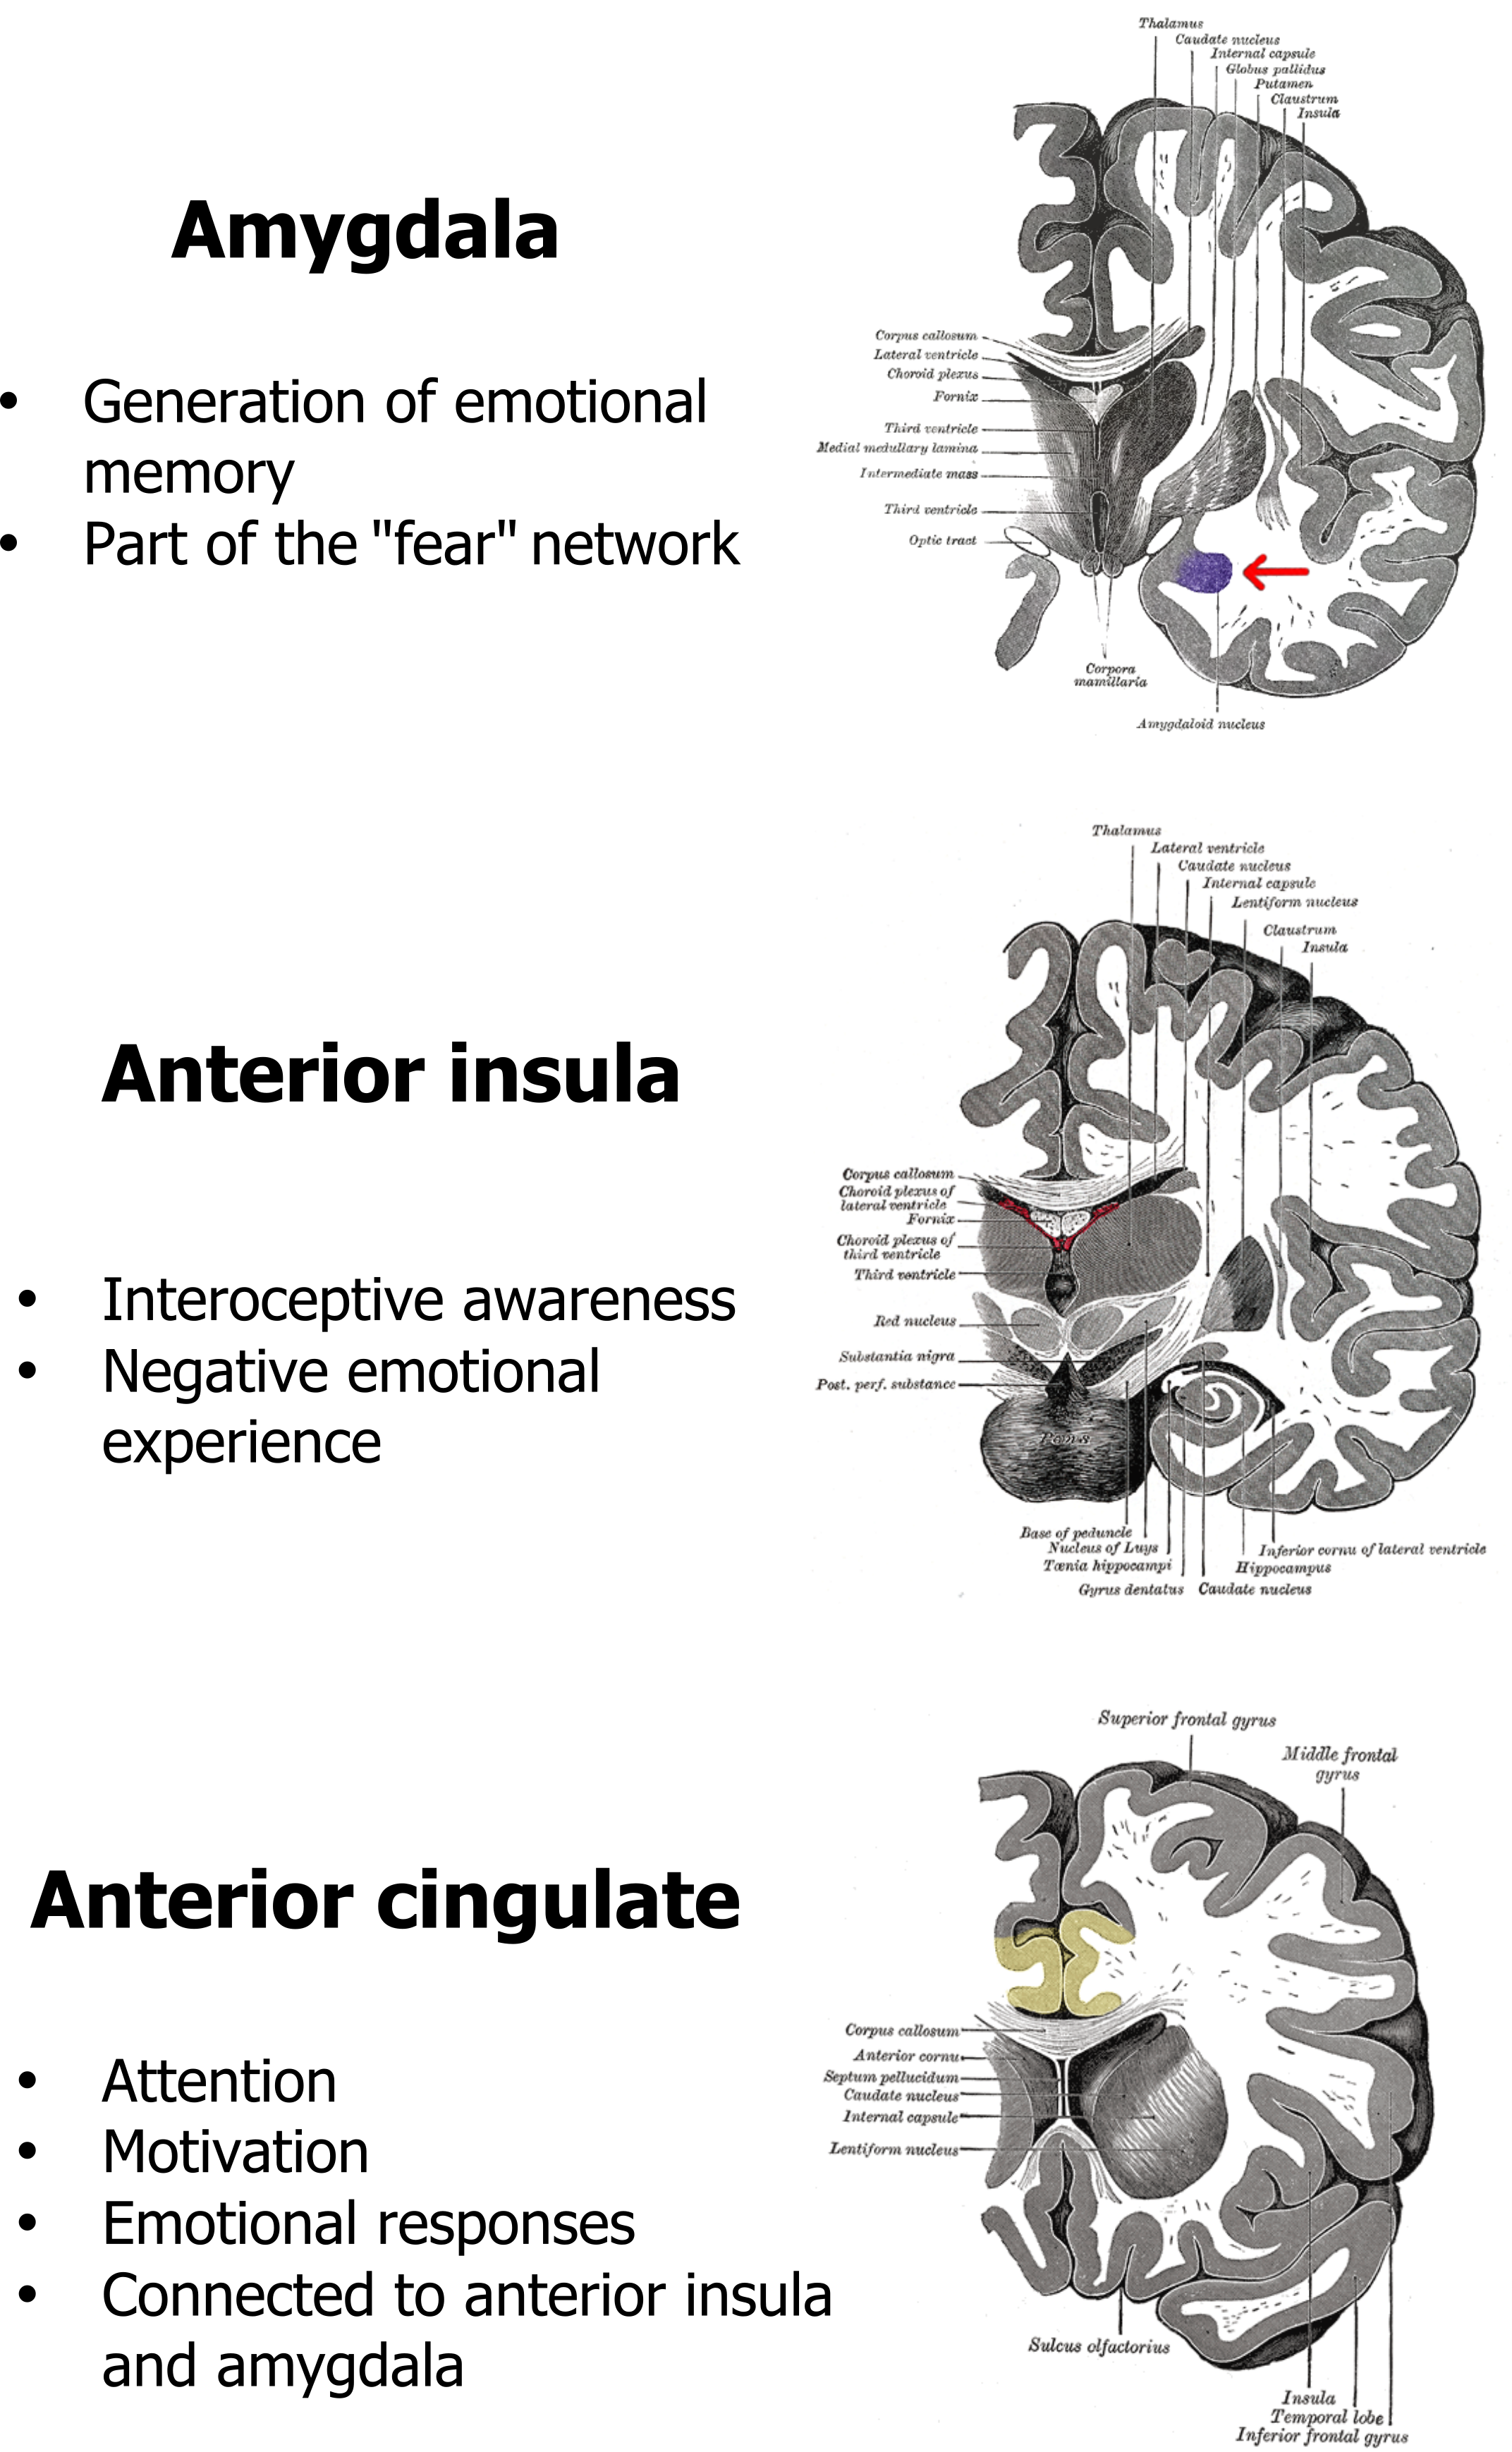 Amygdala: Generation of emotional memory, part of the ‘fear’ network. Anterior insula: interoceptive awareness, negative emotional experience. Anterior cingulate: attention, motivation, emotional responses, connected to anterior insula and amygdala